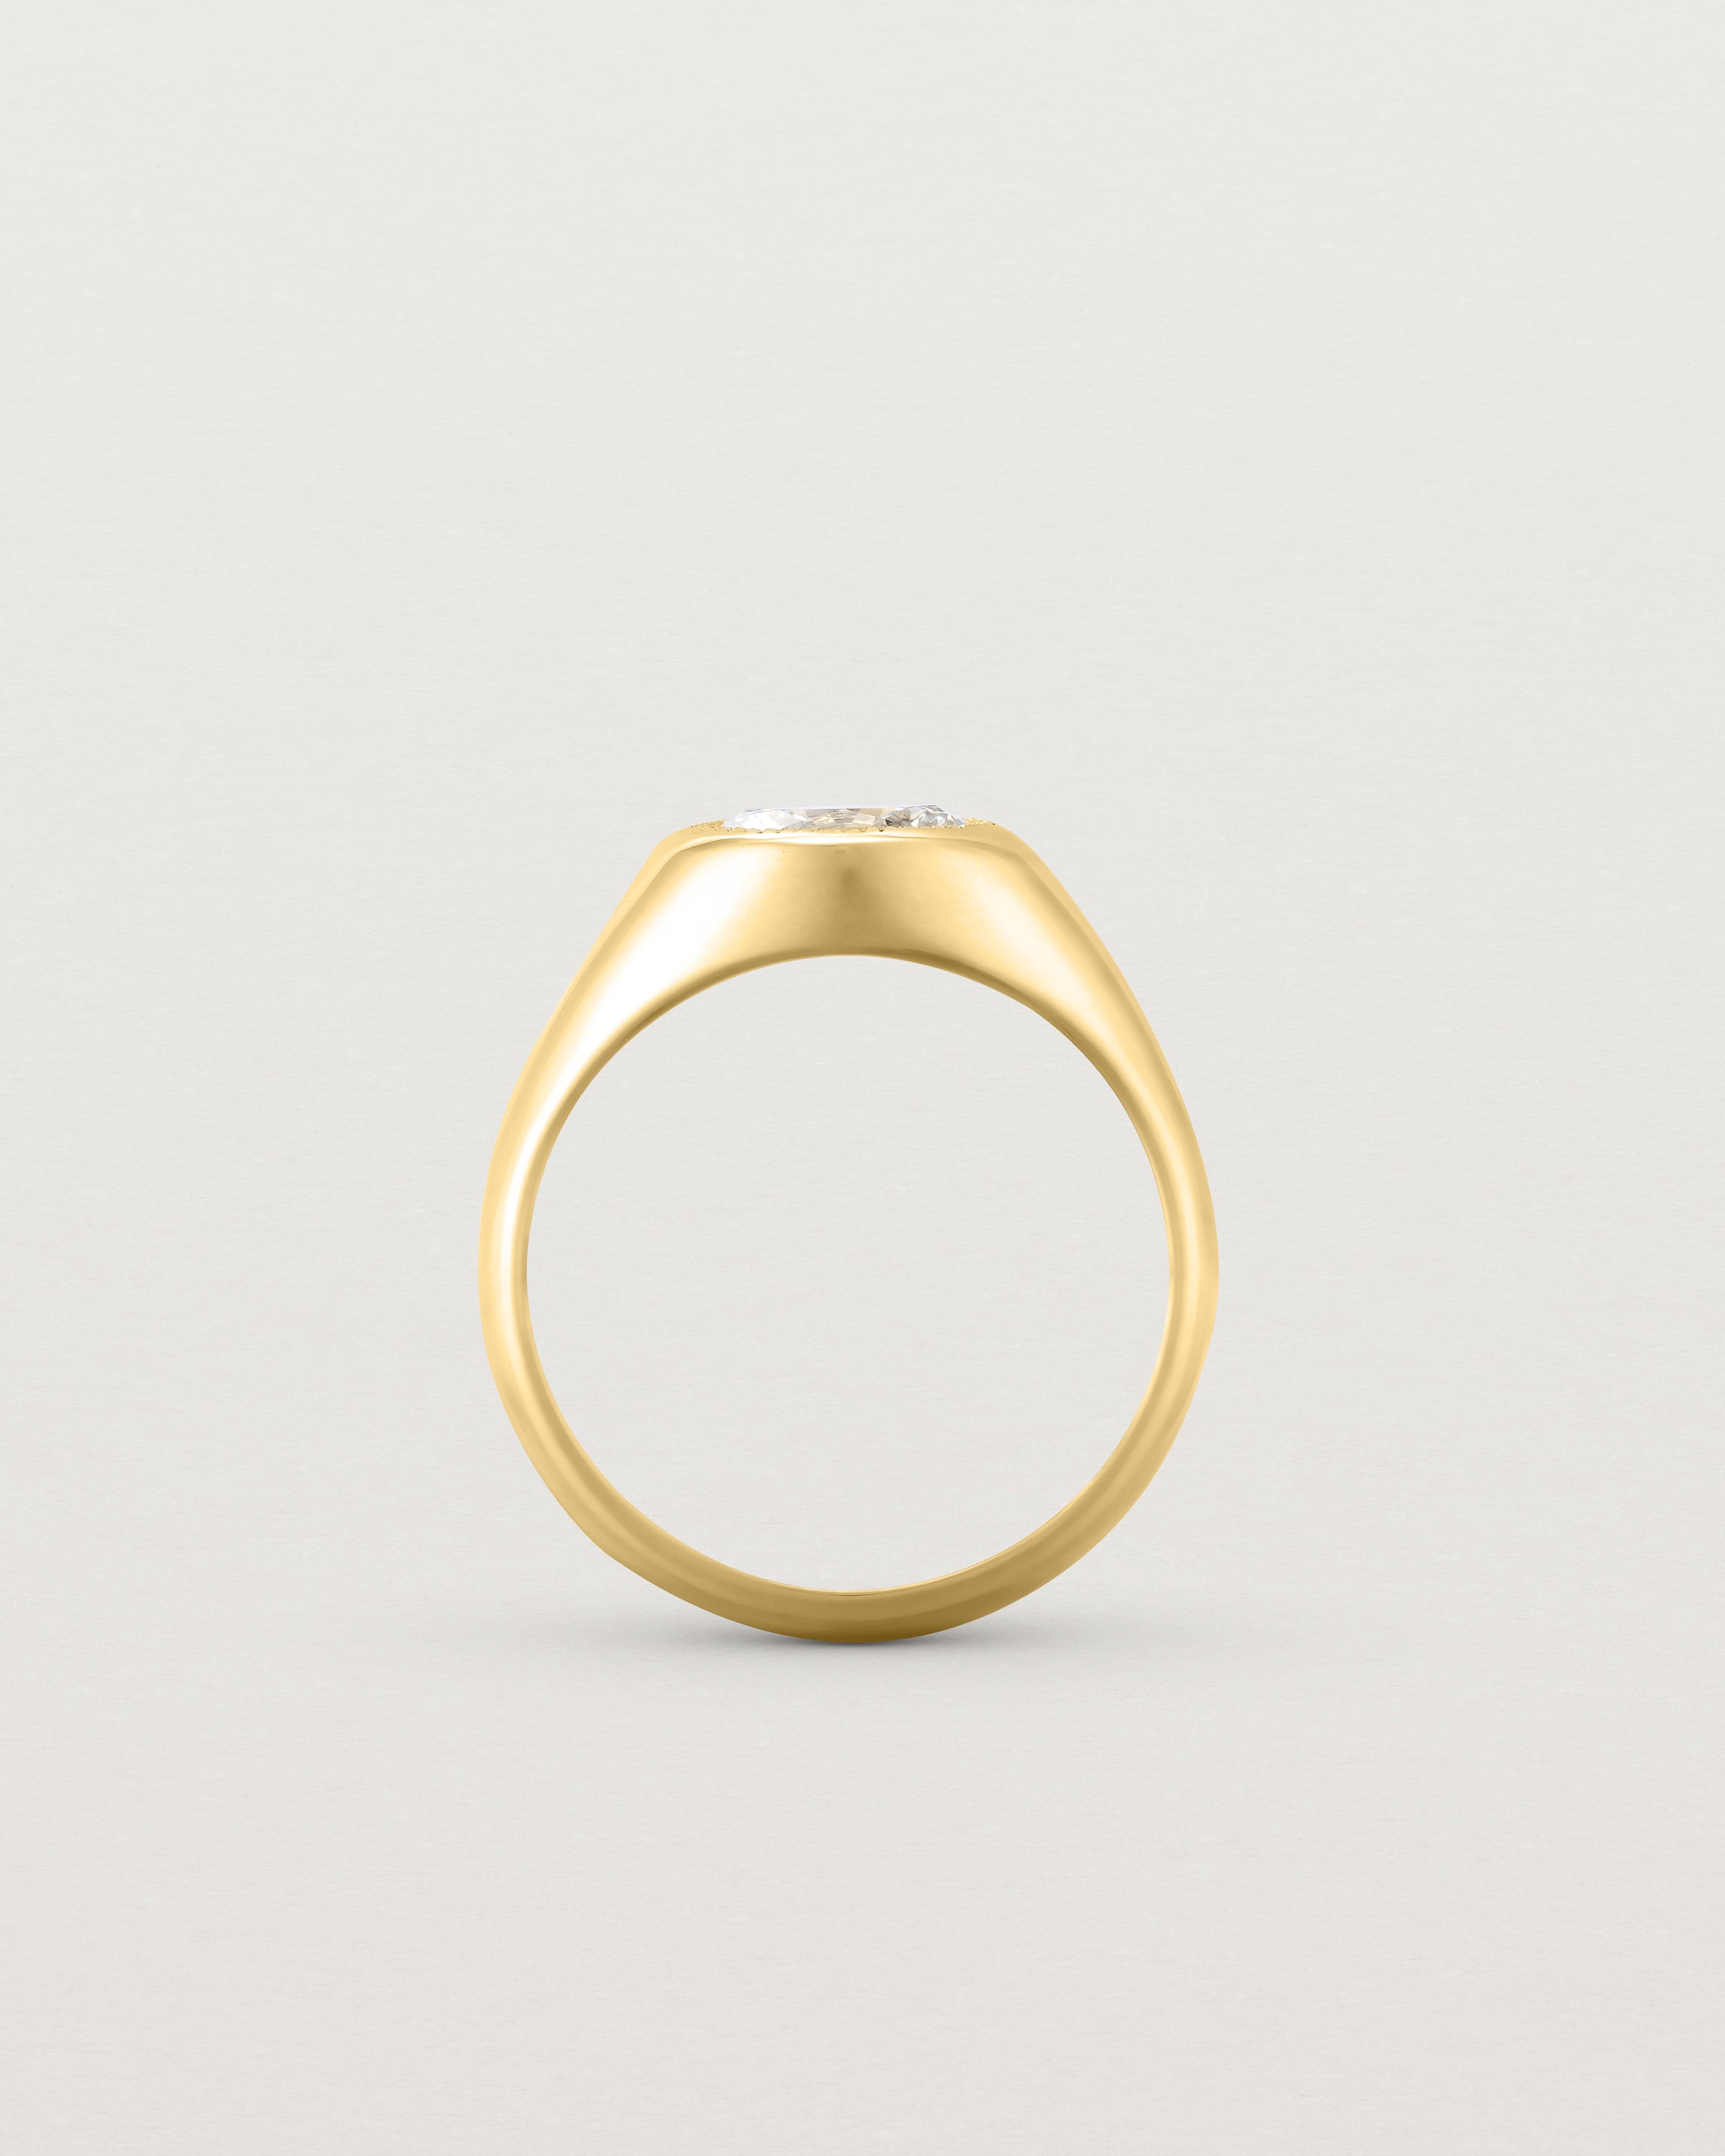 Standing view of the Átlas Oval Signet | Laboratory Grown Diamond in yellow gold, with a polished finish.